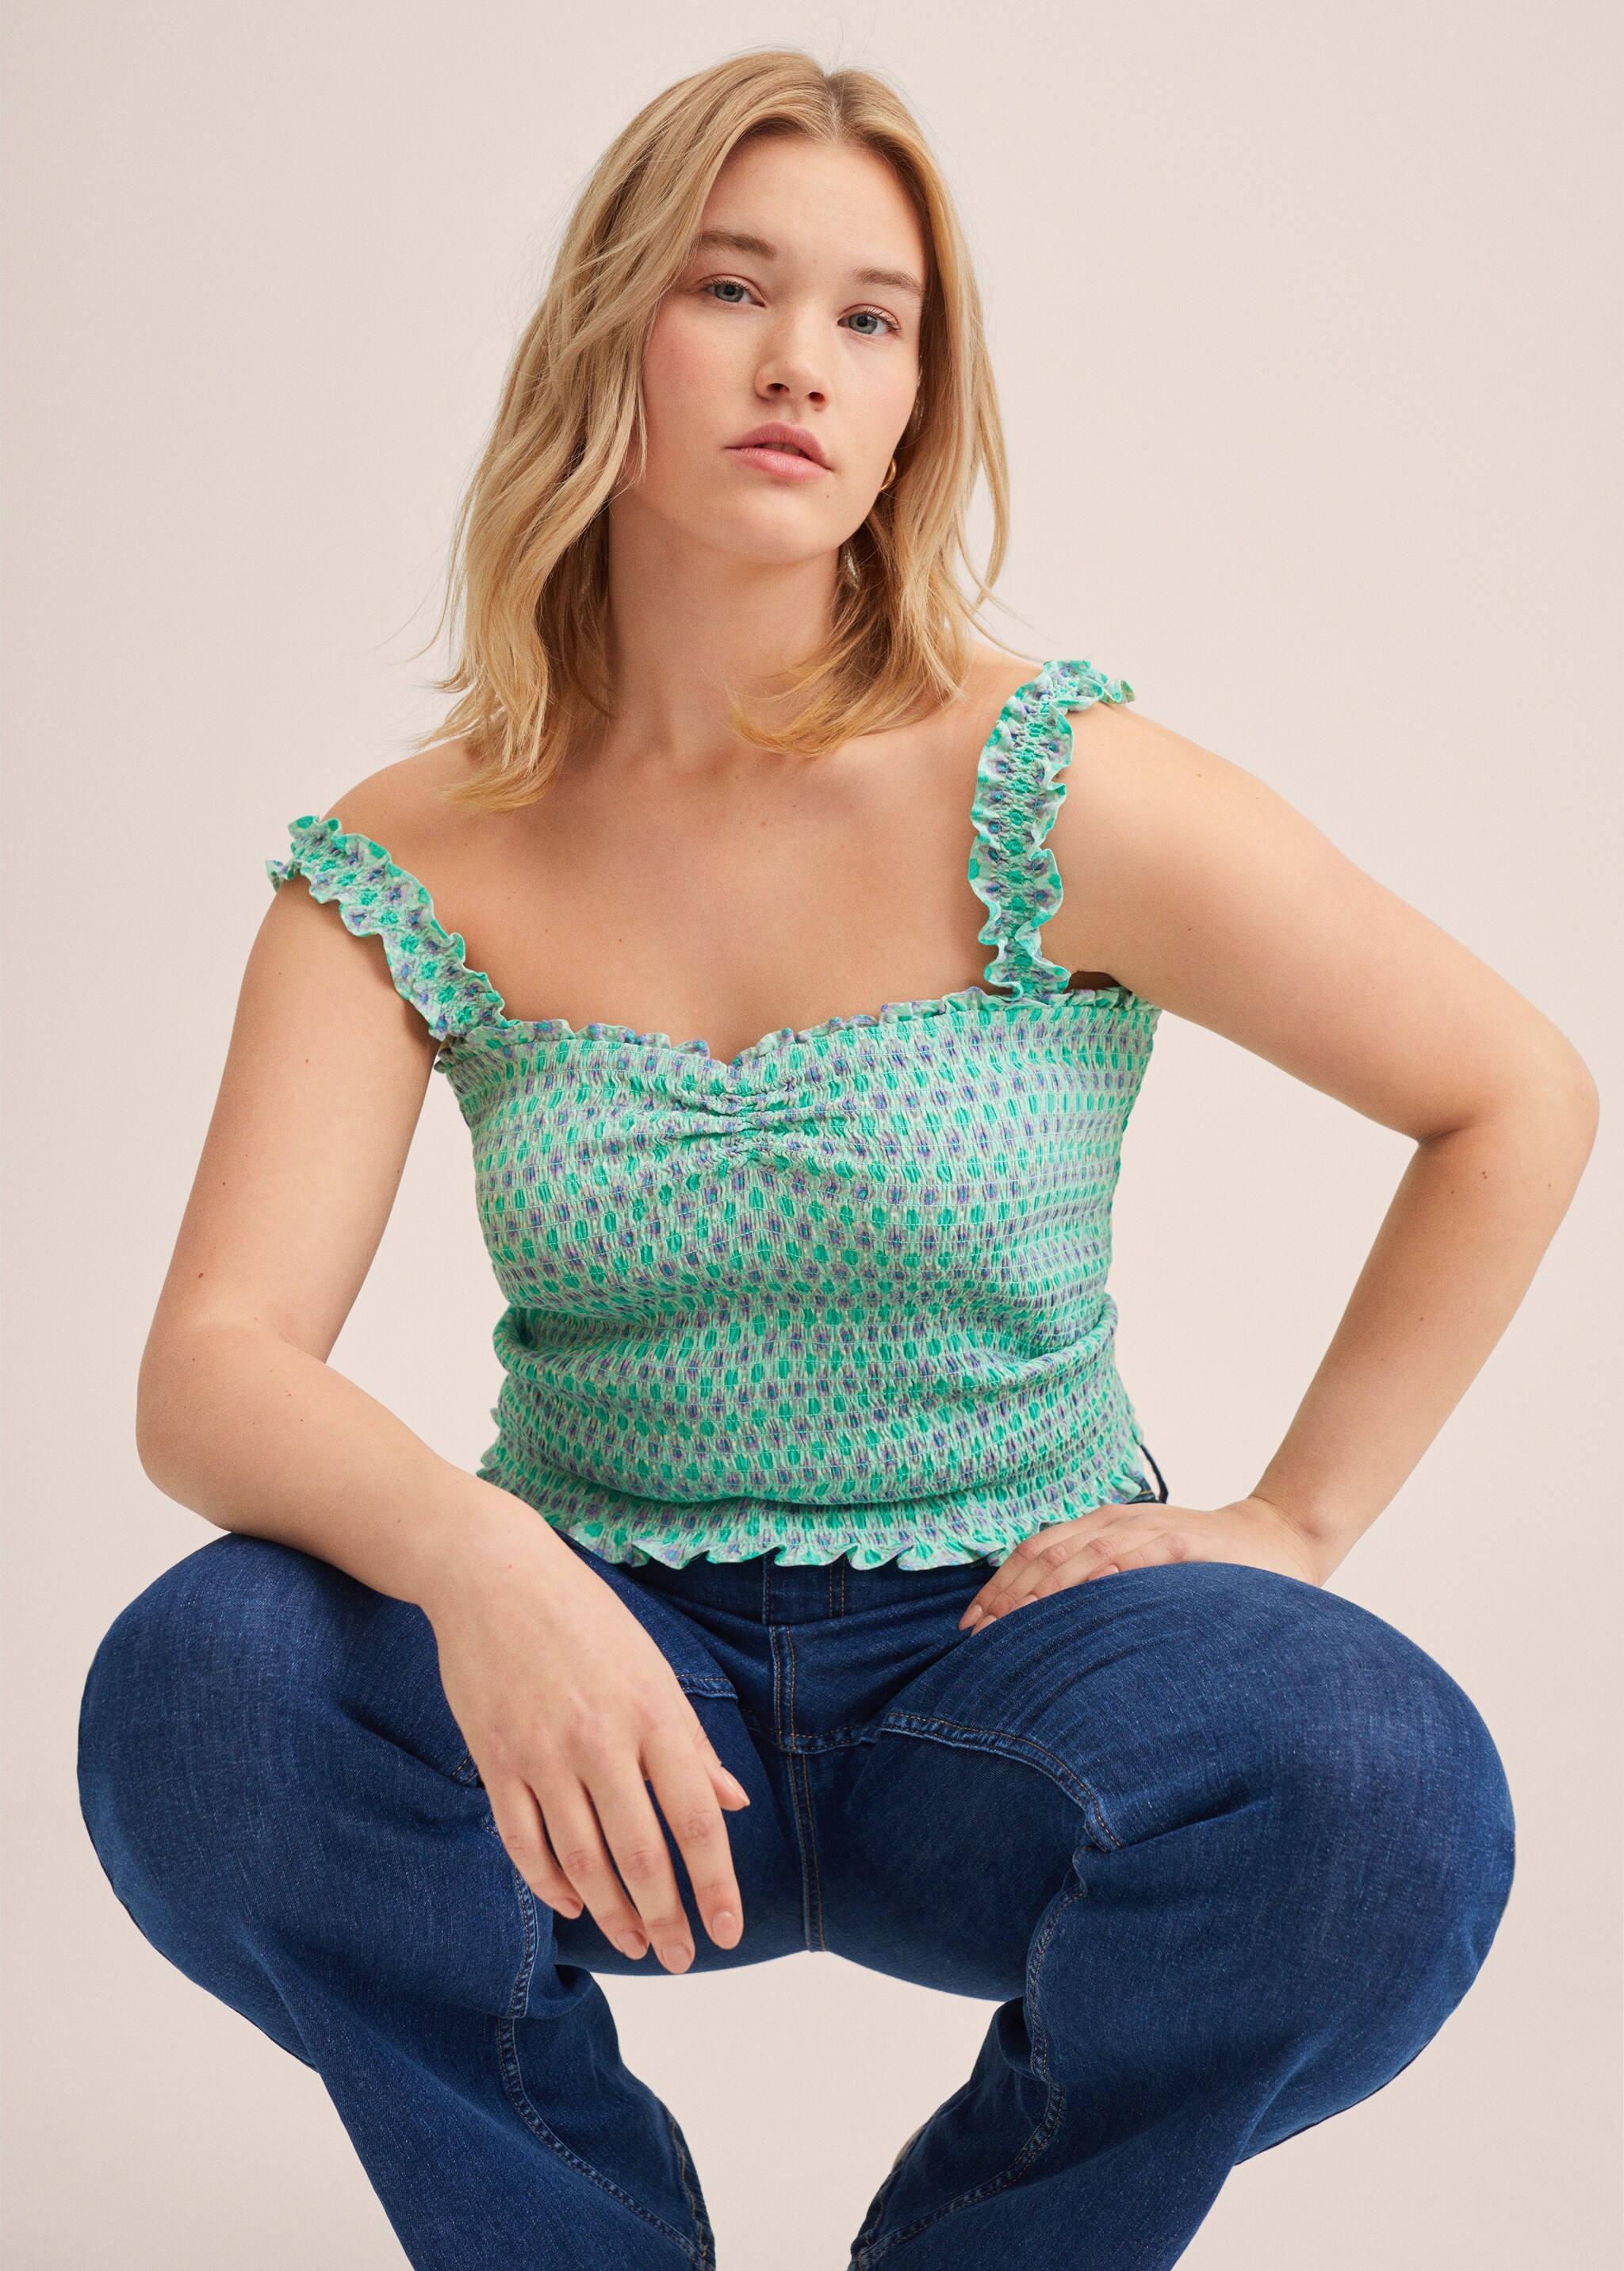 Draped crop top - Details of the article 5